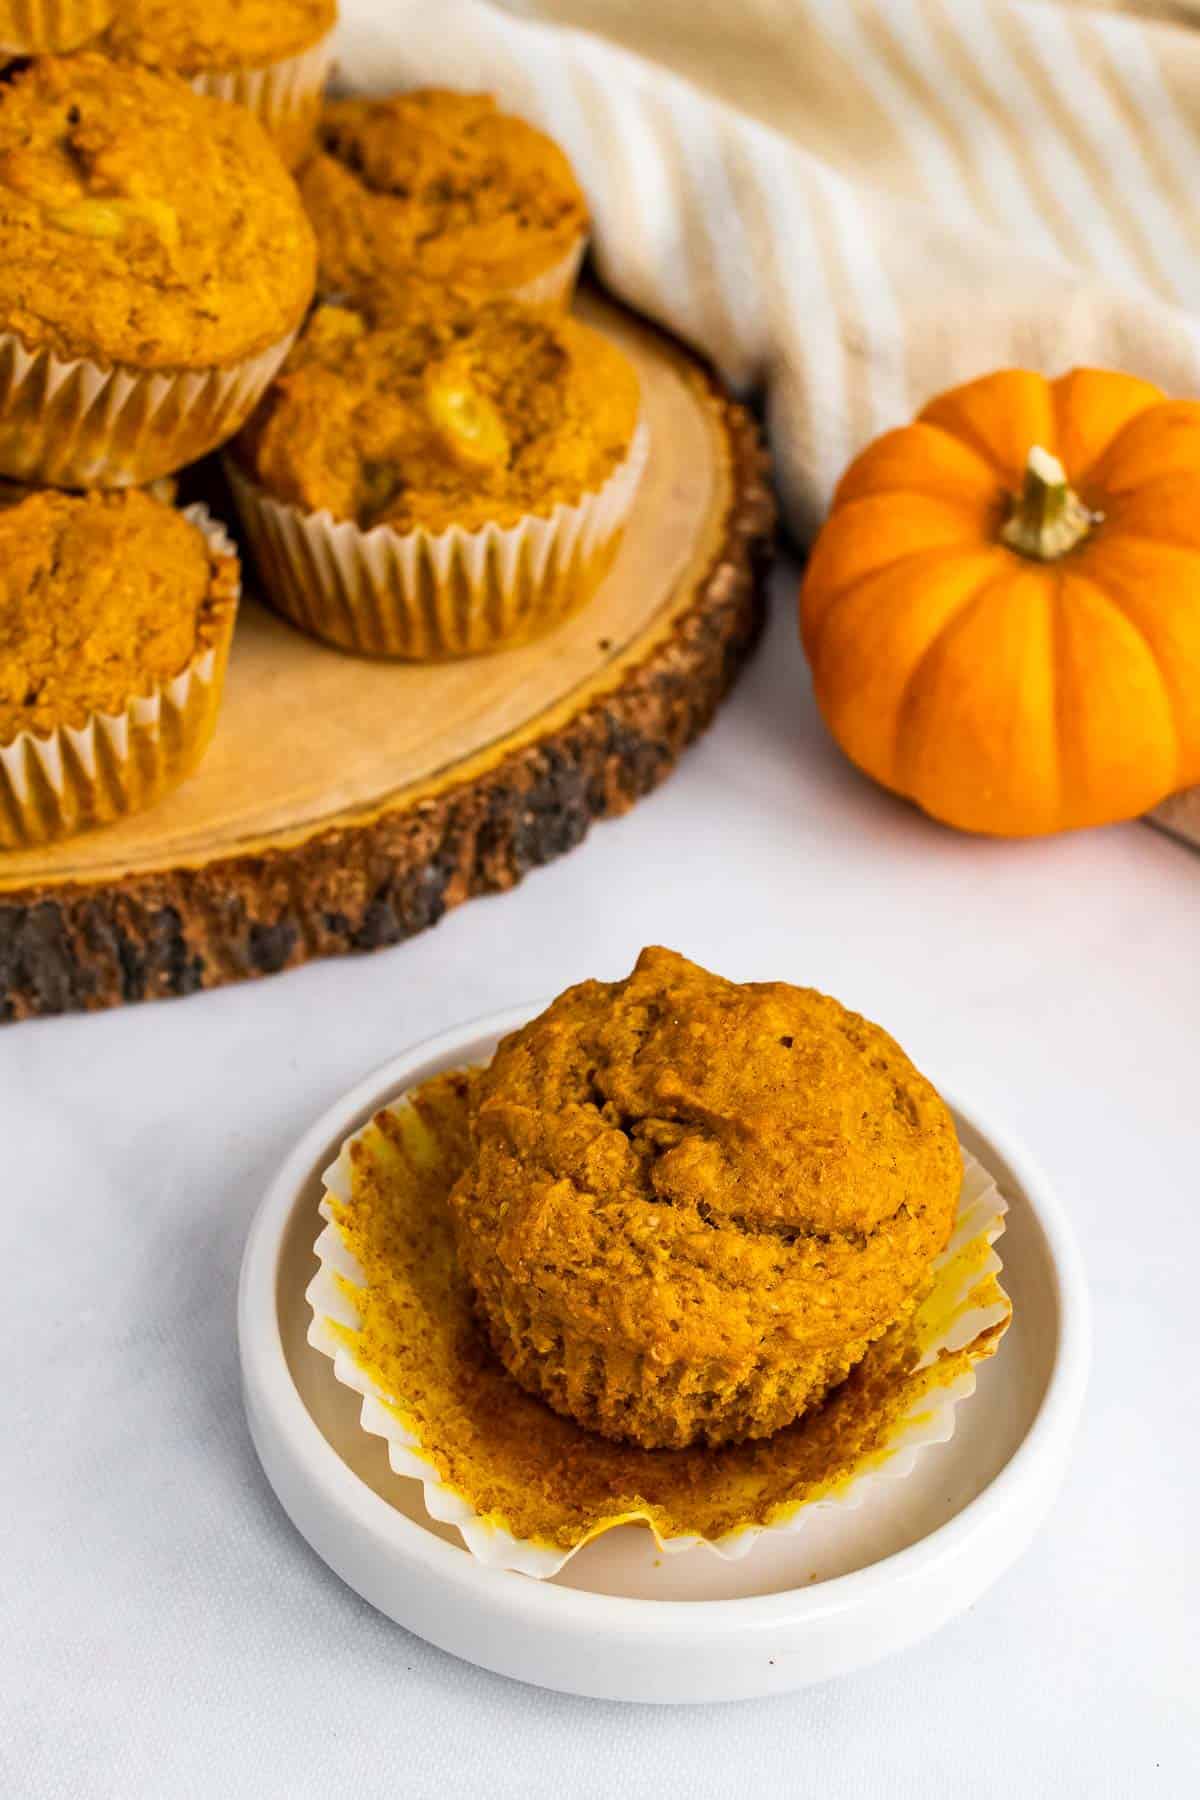 One muffin on a small white plate in front of a serving tray with more muffins; pumpkin in the background